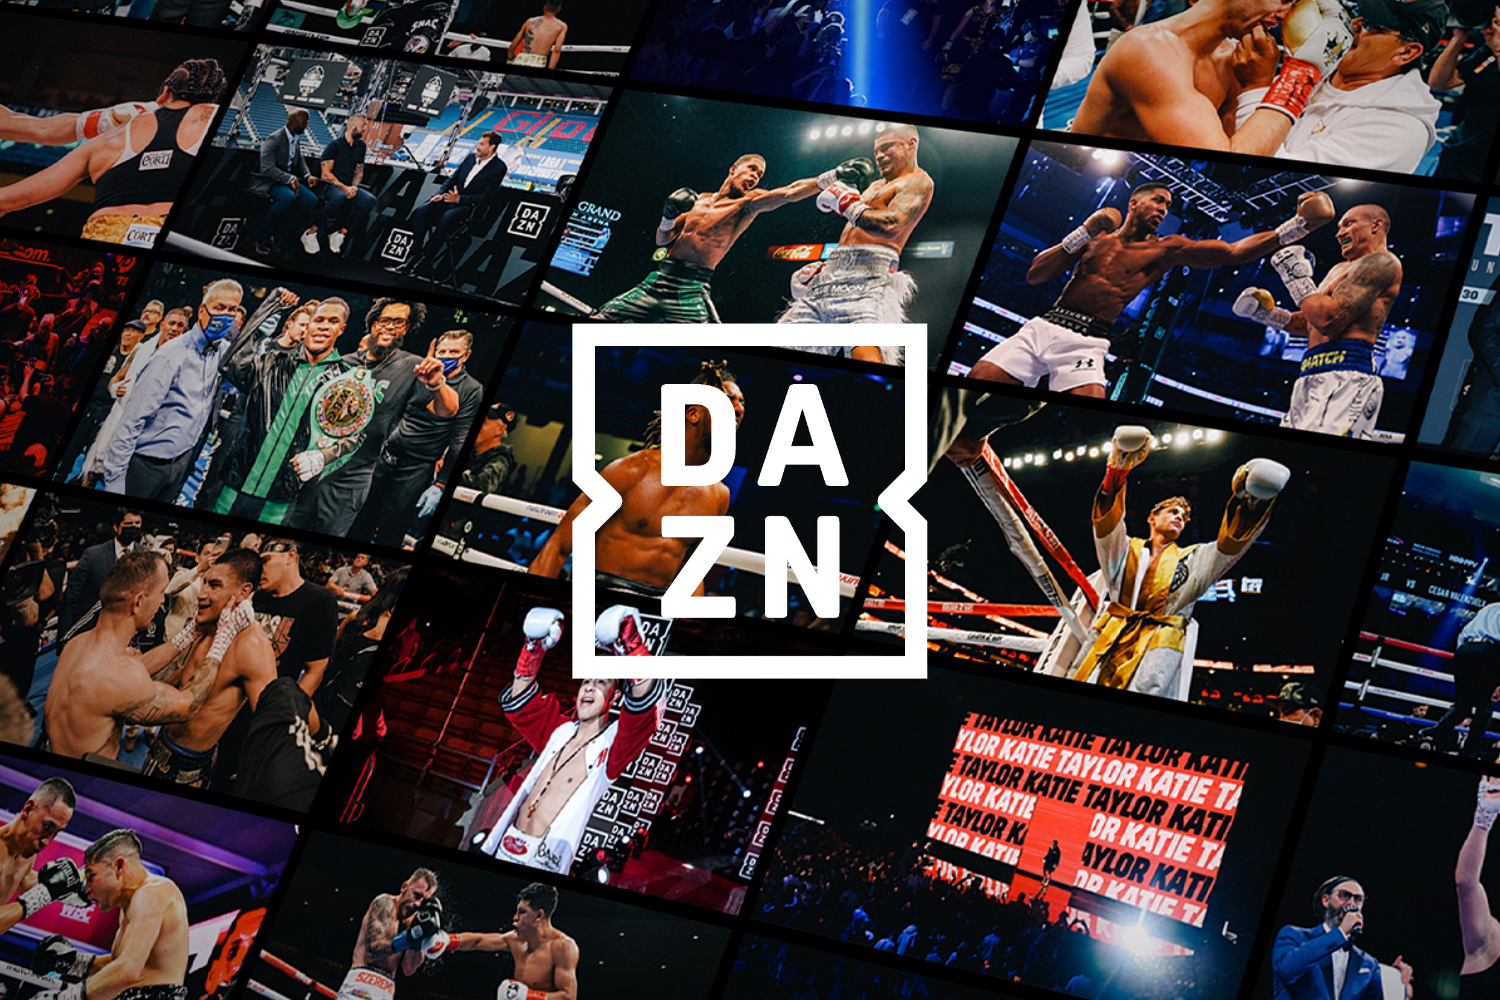 Everything you need to know about Dazn